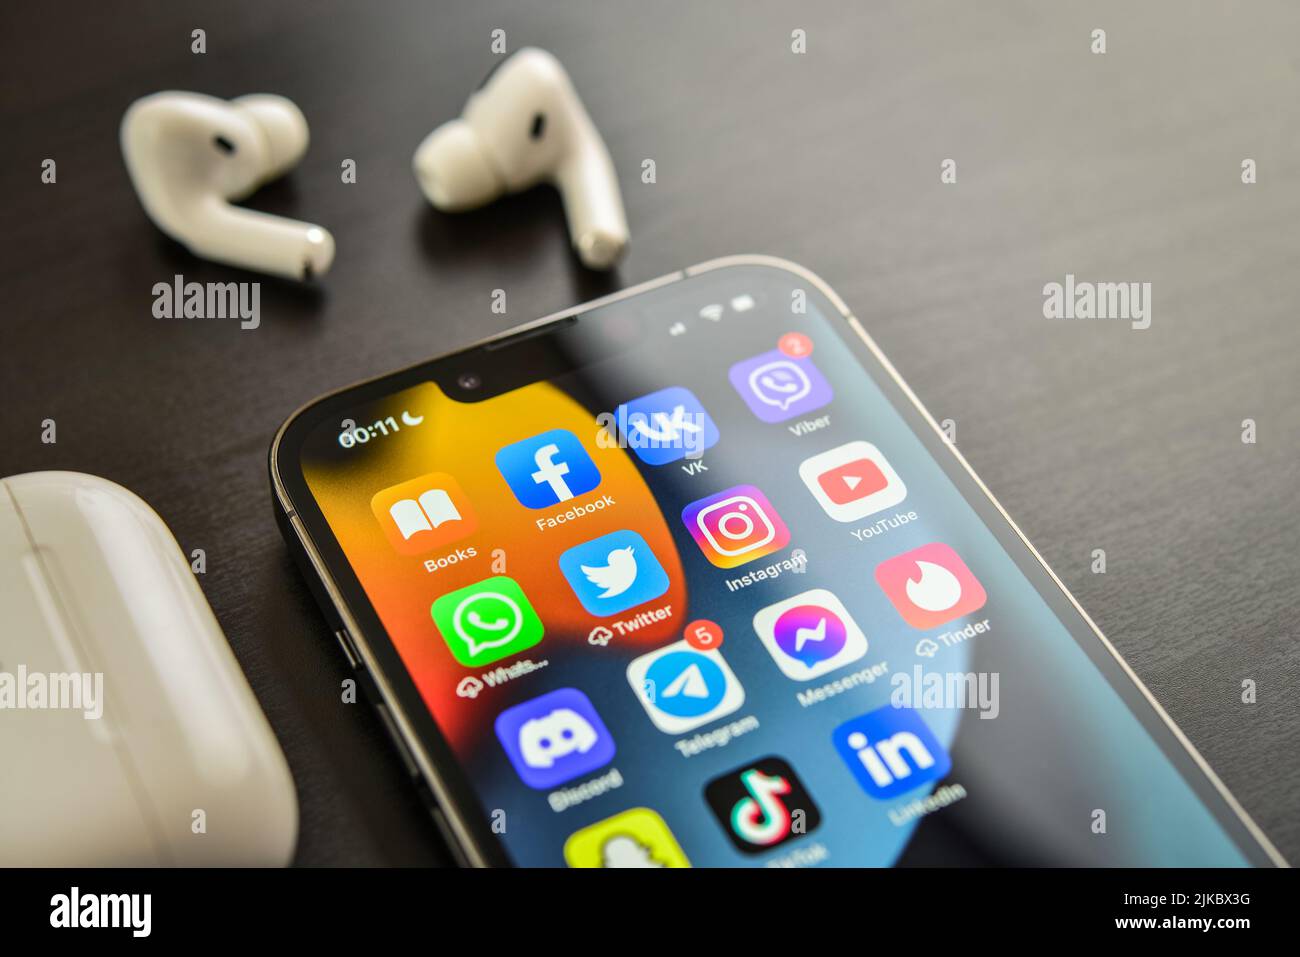 KIEV, UKRAINE - FEBRUARY 10, 2022:  Social media icons on screen of  iPhone 13 Pro with AirPods Pro headphones. Social media are most popular tool for Stock Photo